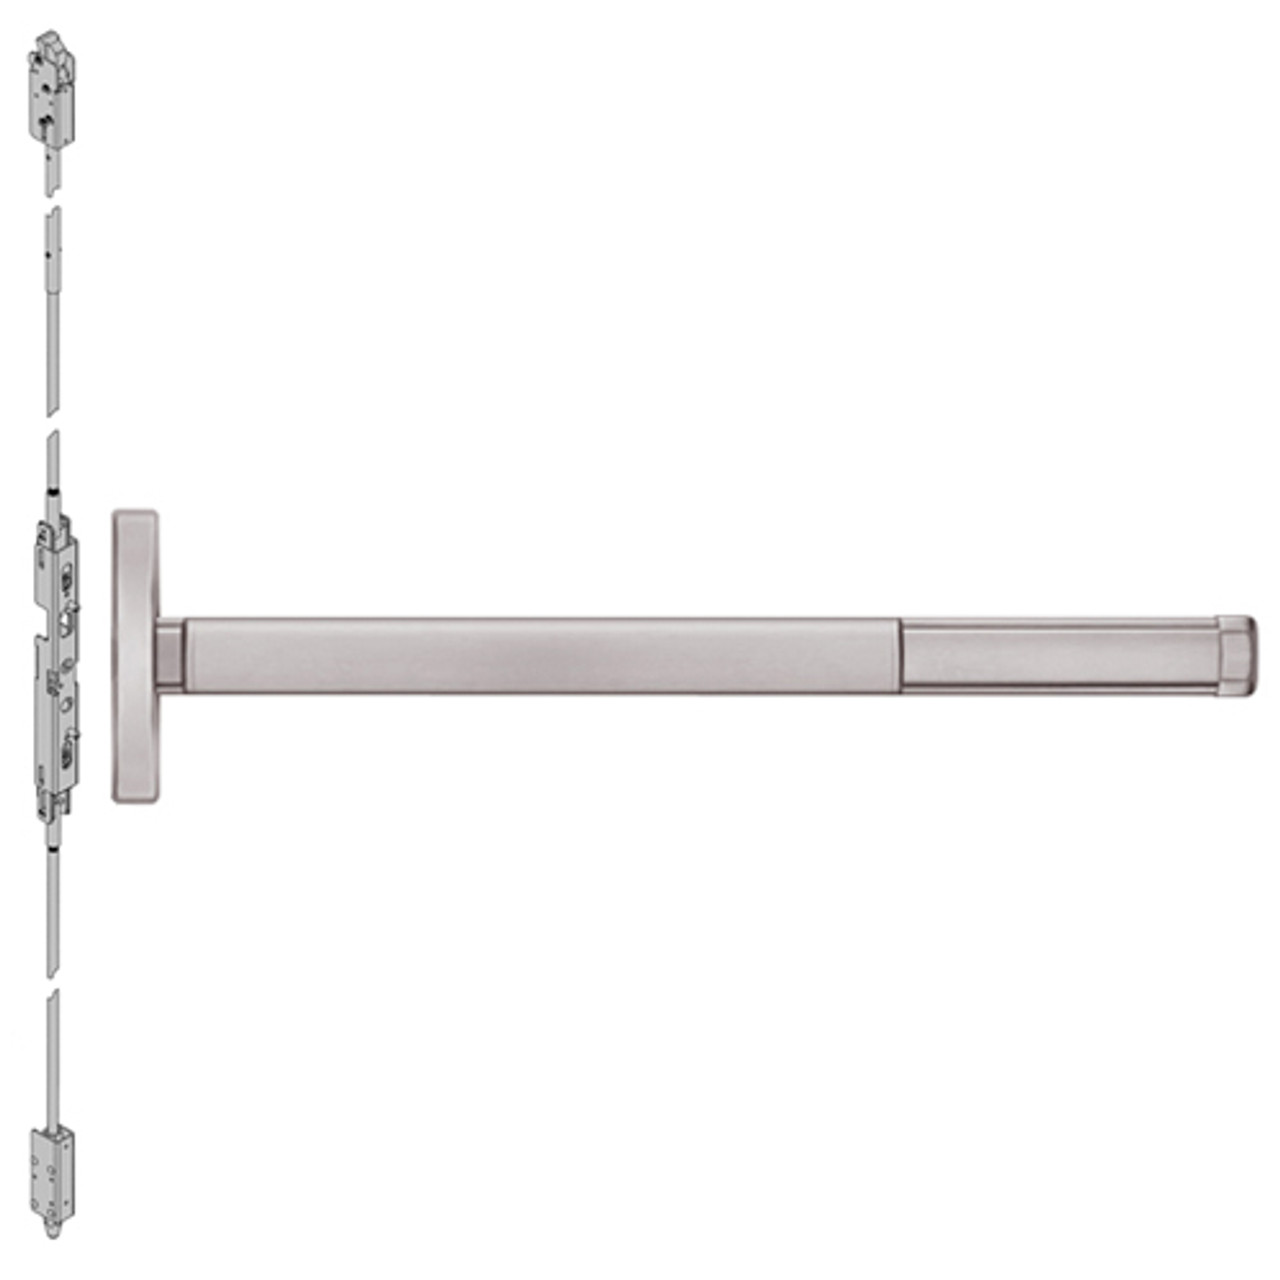 DE2602LBR-628-36 PHI 2600 Series Concealed Vertical Rod Exit Device with Delayed Egress Prepped for Dummy Trim in Satin Aluminum Finish